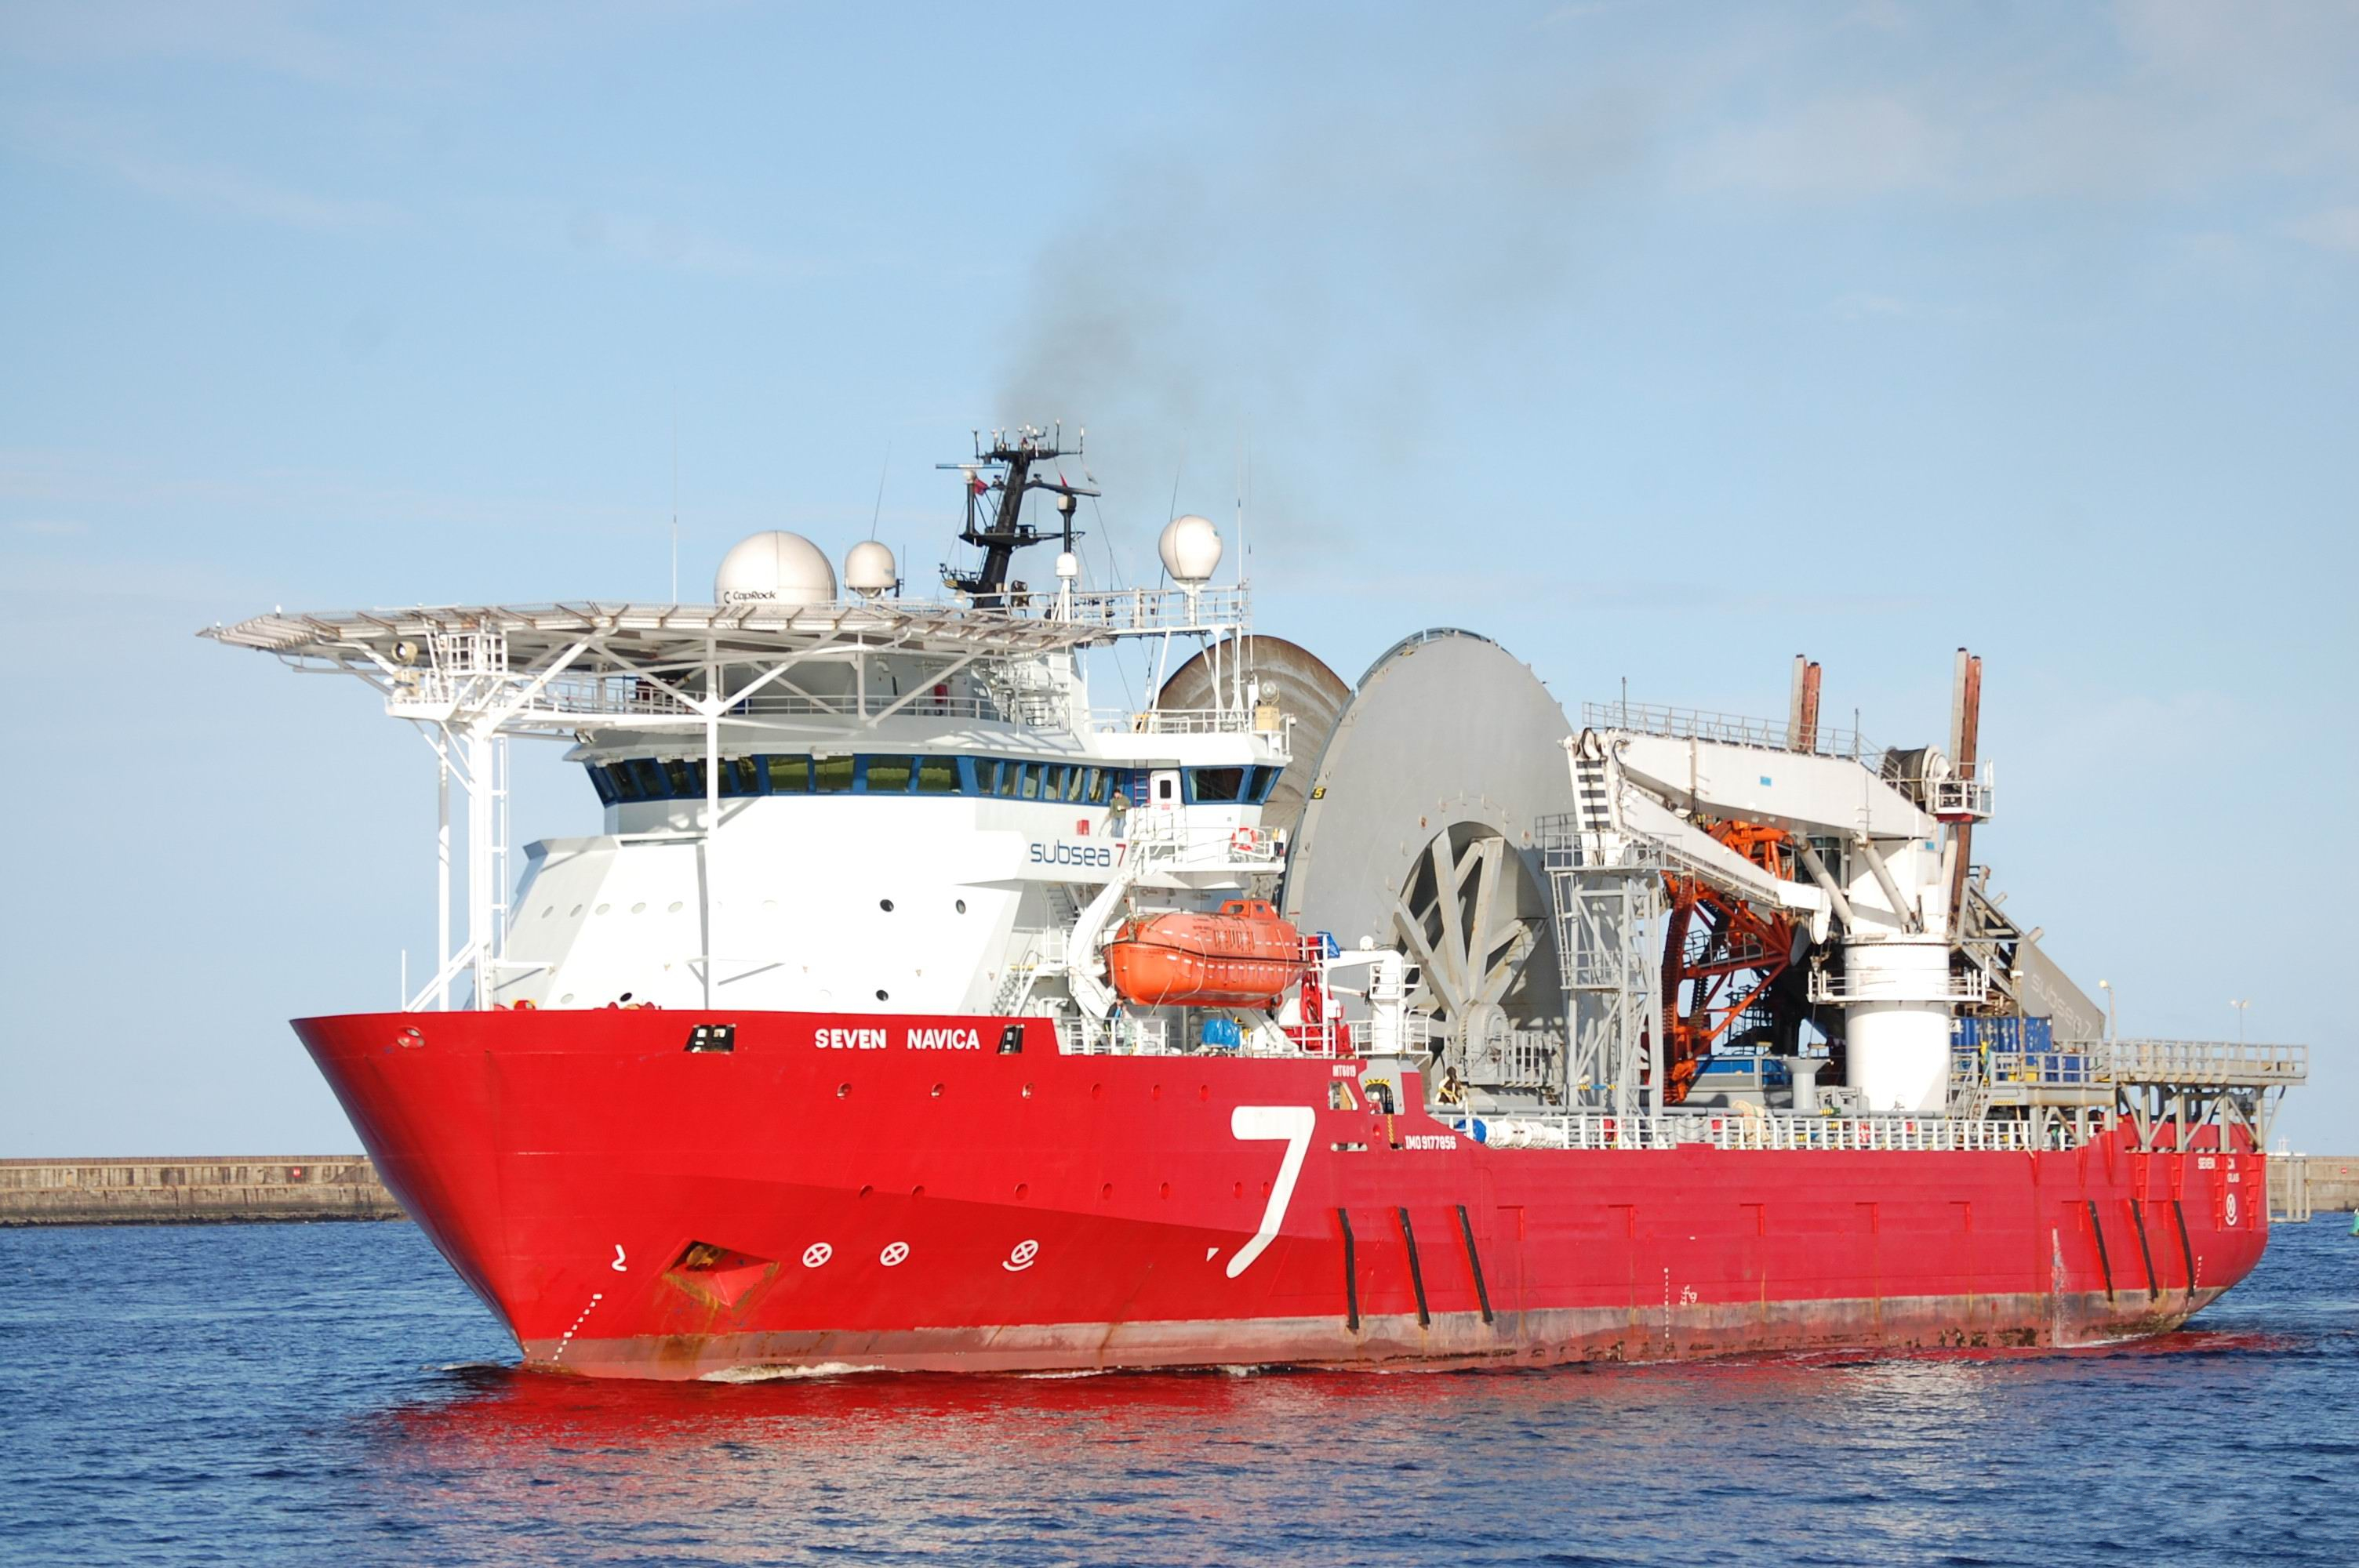 Vehicles Offshore Support Vessel HD Wallpaper | Background Image